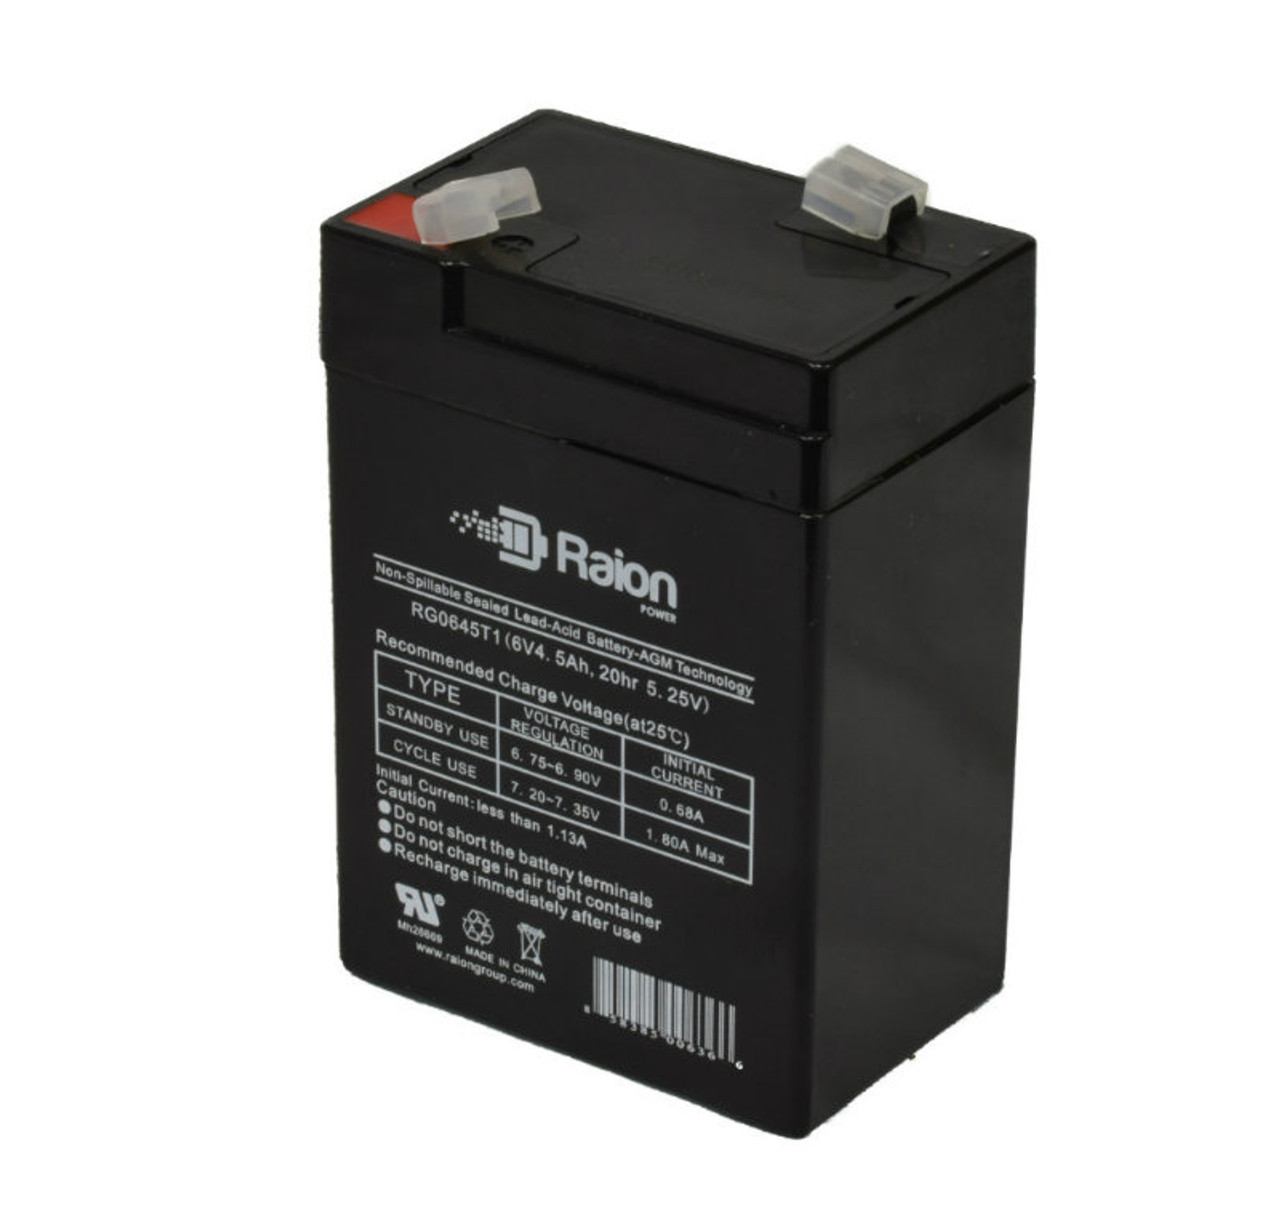 Raion Power RG0645T1 6V 4.5Ah Replacement Battery Cartridge for Philips Medical Systems H102 Communicator